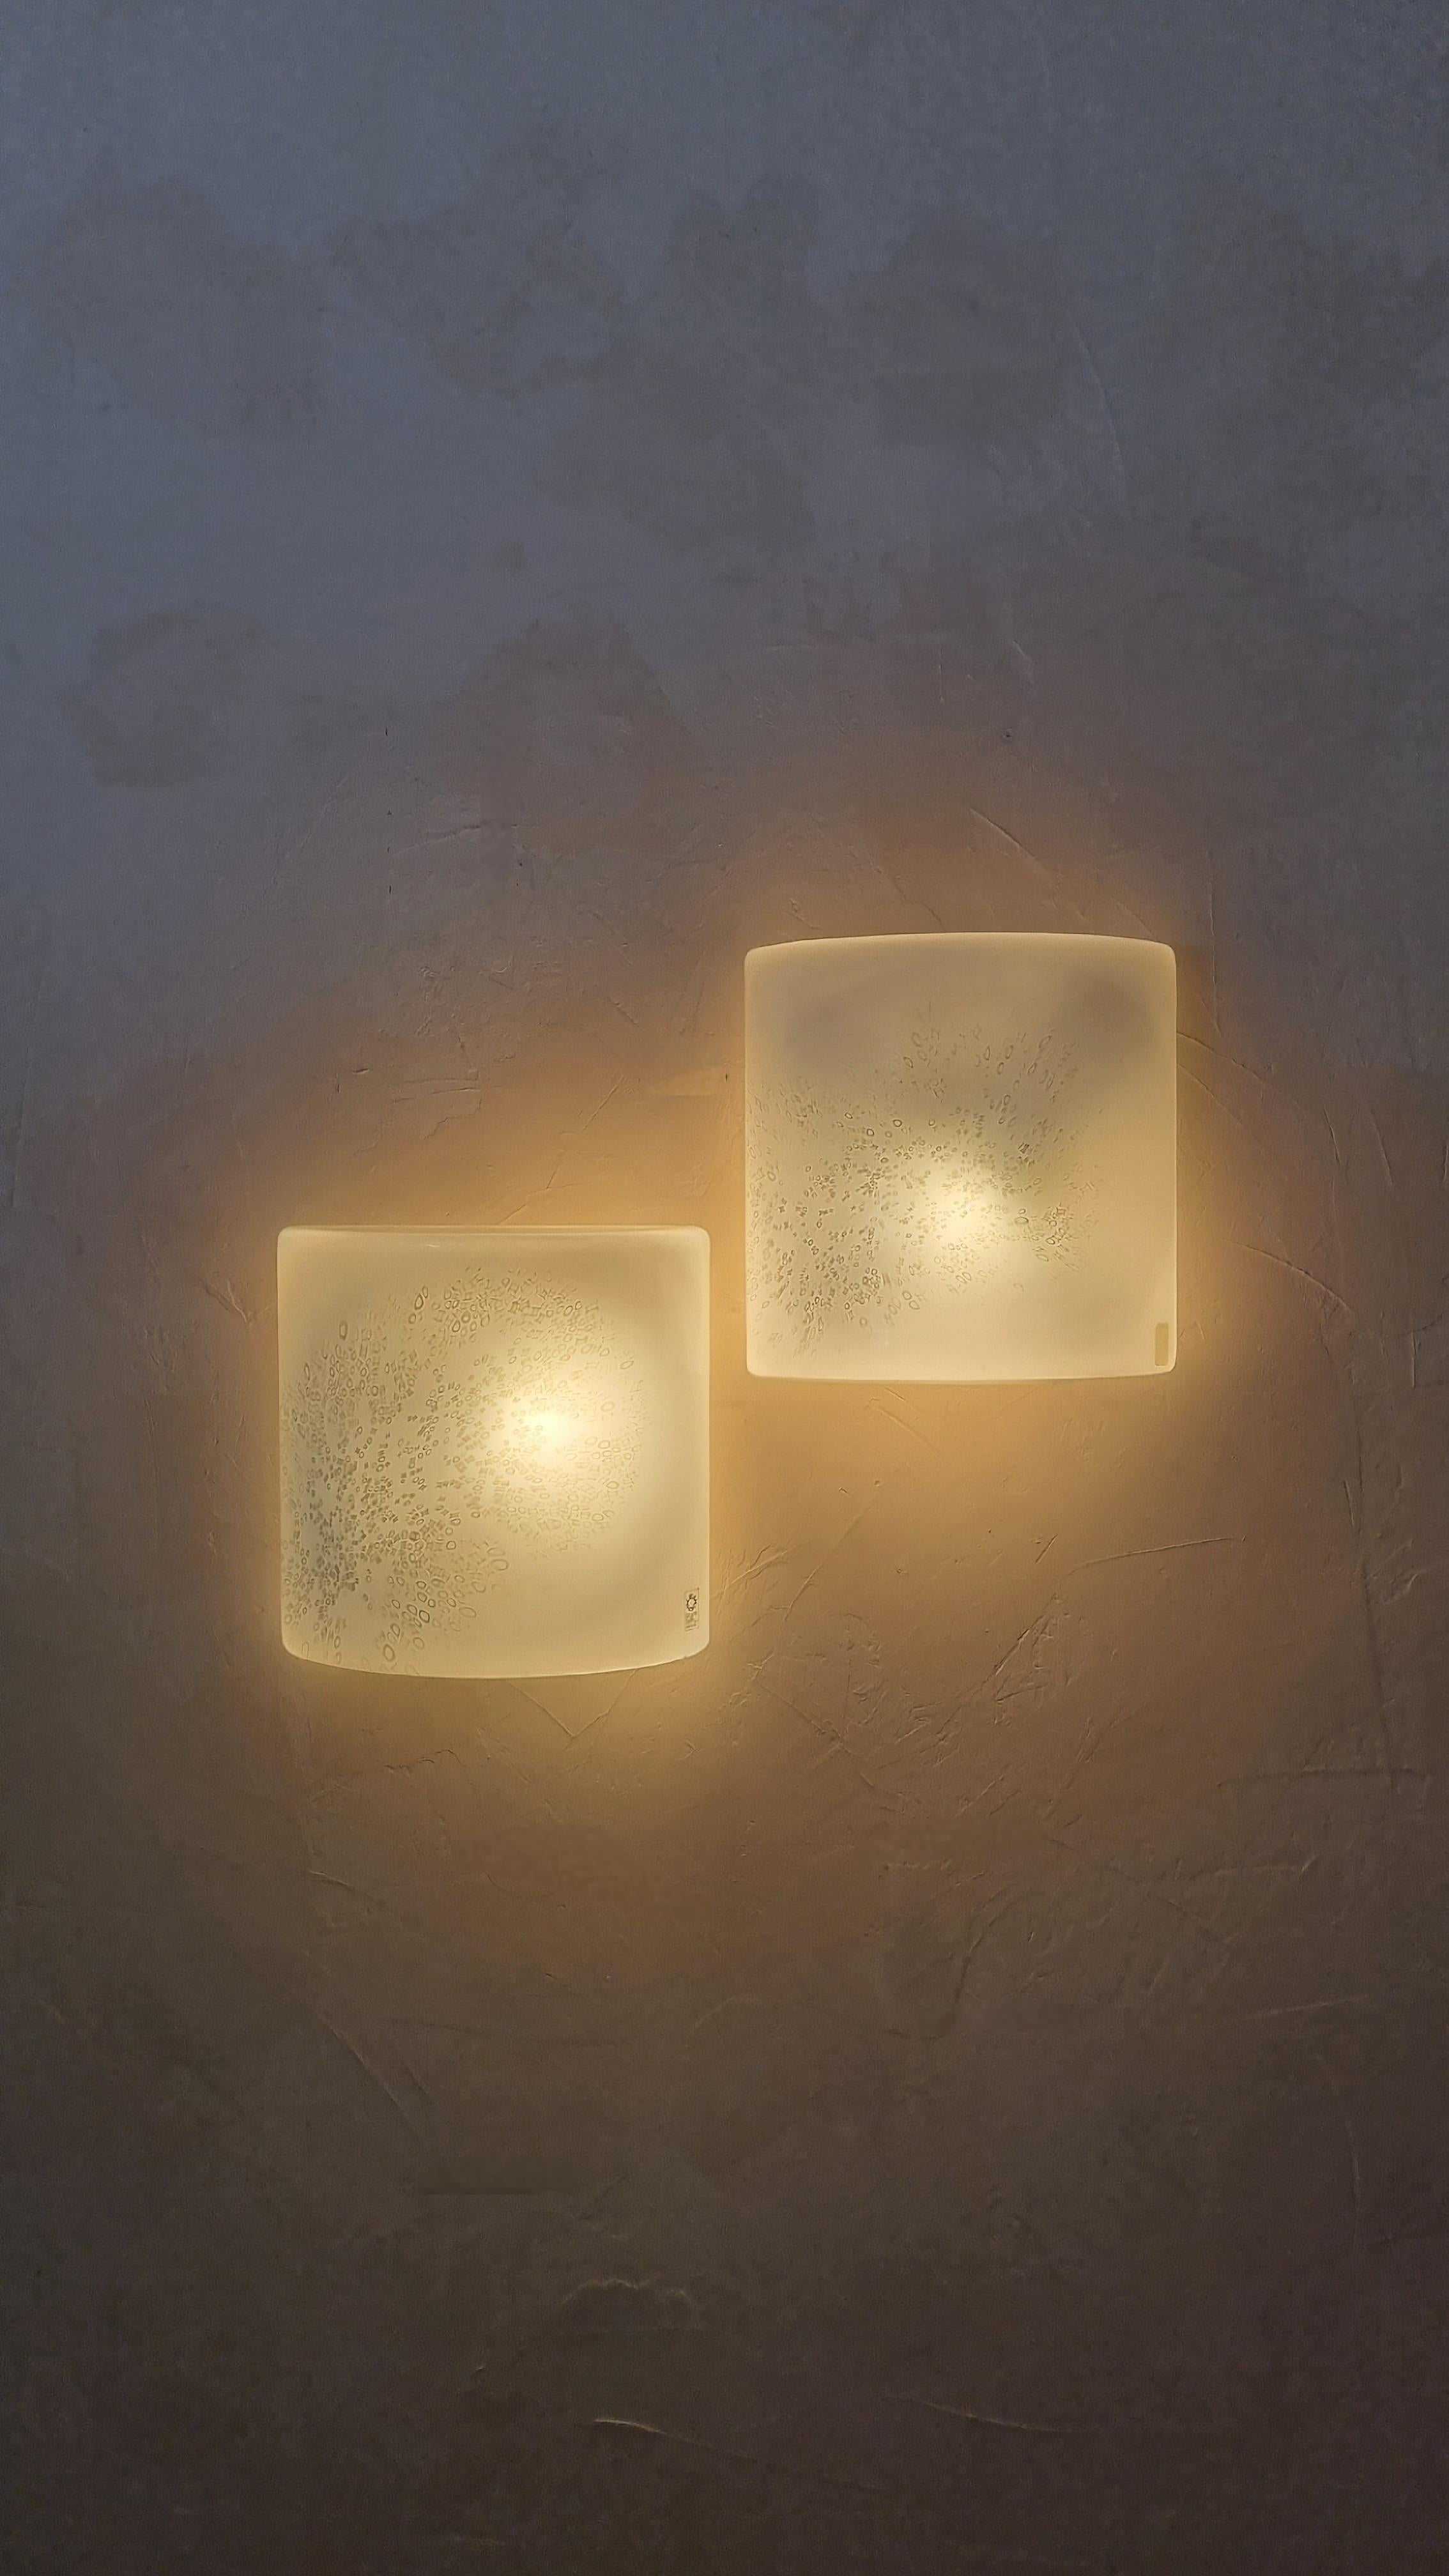 Set of 2  Idra wall sconces designed by Rosanna Toso in the 70s, painted metal structure, Murano glass diffusers, two light points, mounting E 27 bulbs.
Excellent conditions, new electric plant, perfectly working.
Bibliography:
Leucos lighting